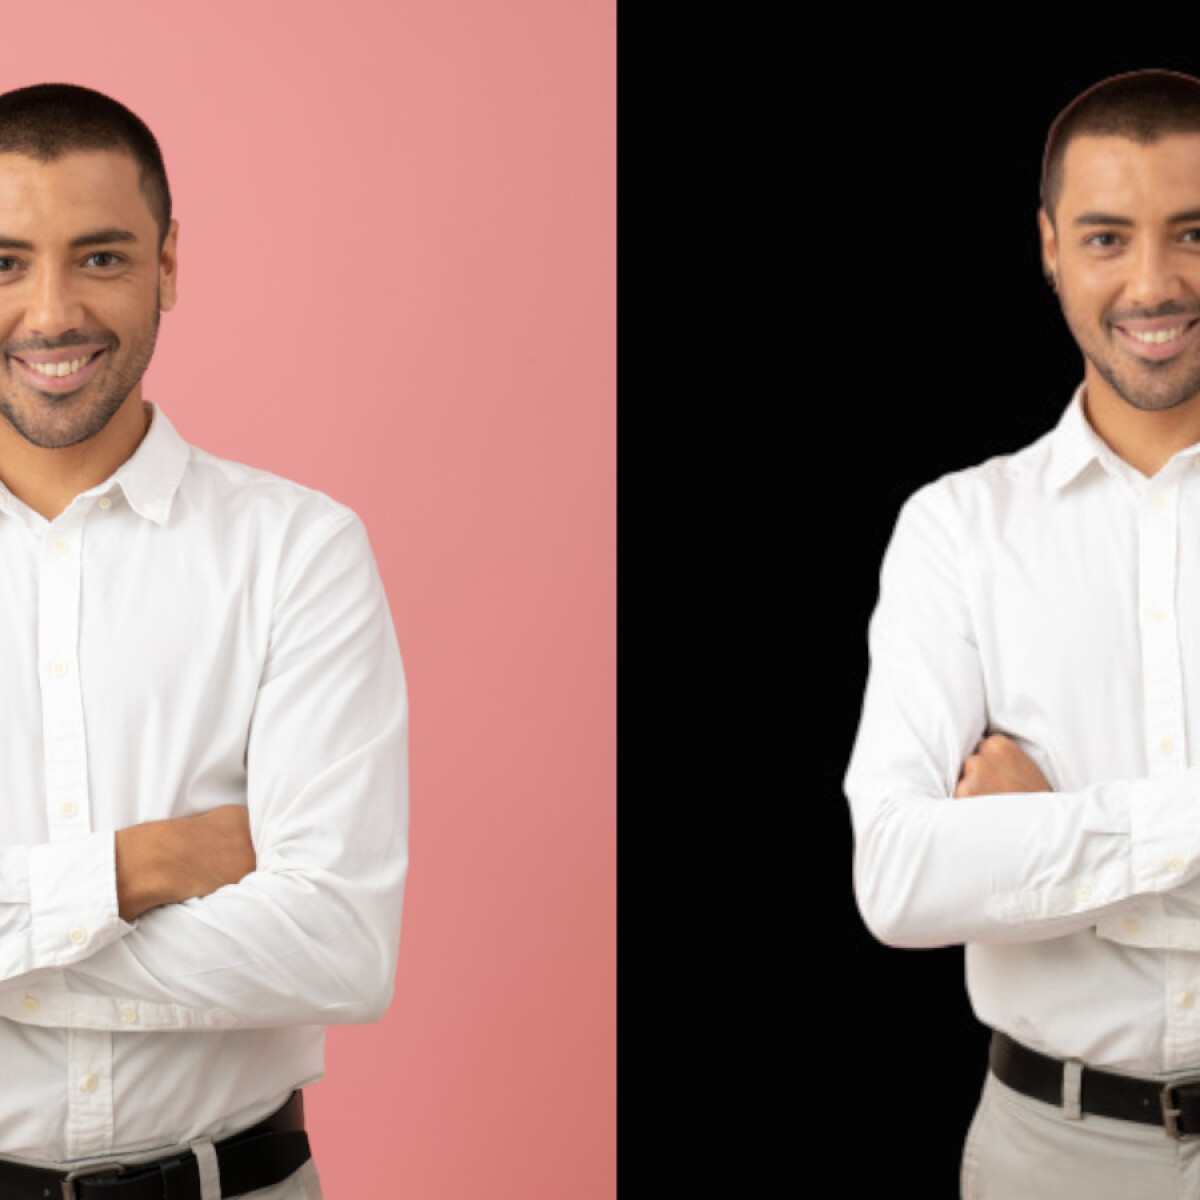 3 easy ways to remove backgrounds from images